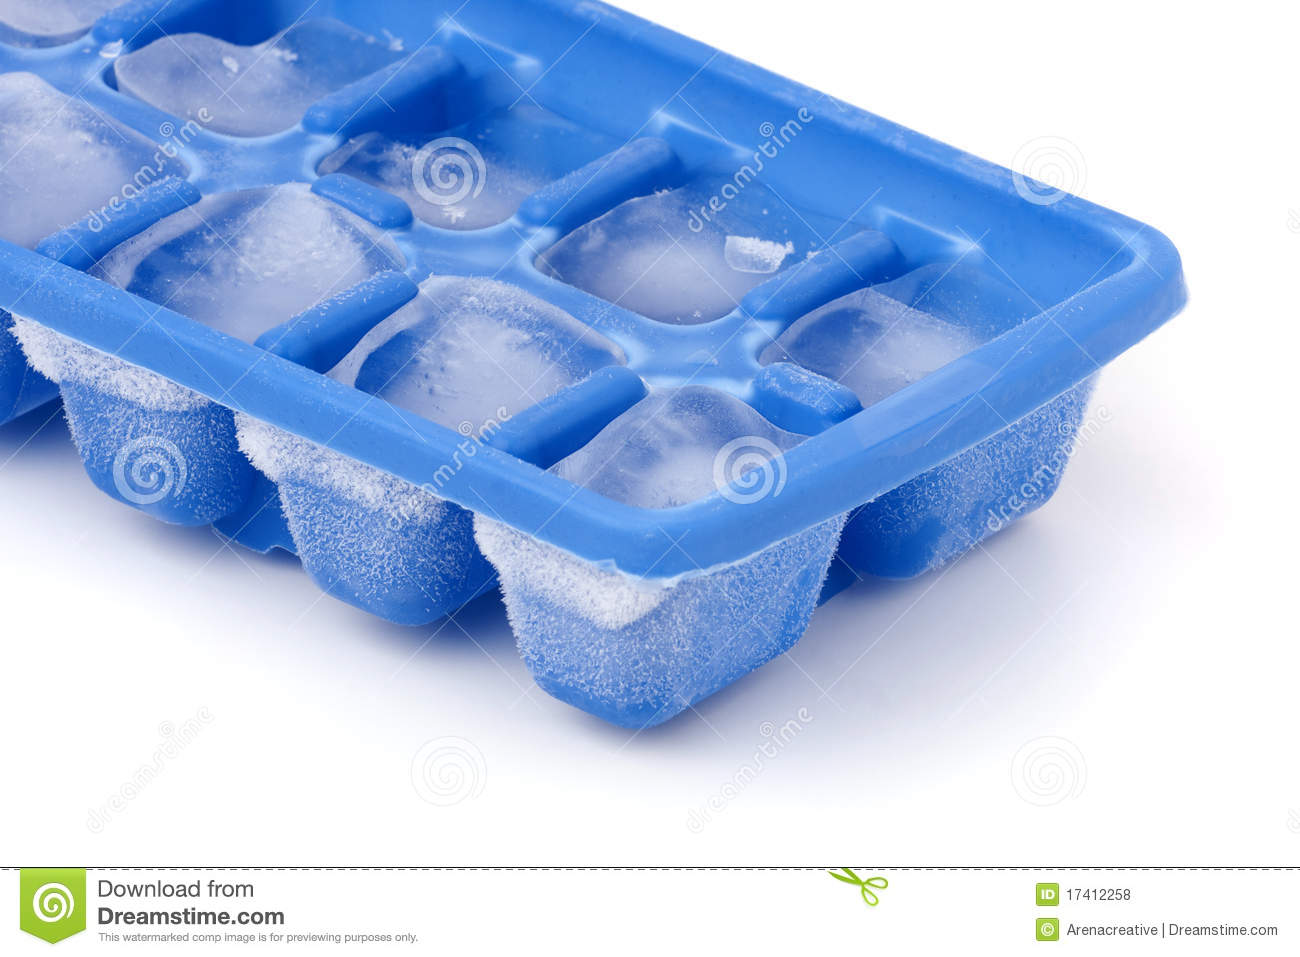 Blue Plastic Ice Cube Tray With Frost On It Isolated Over A White